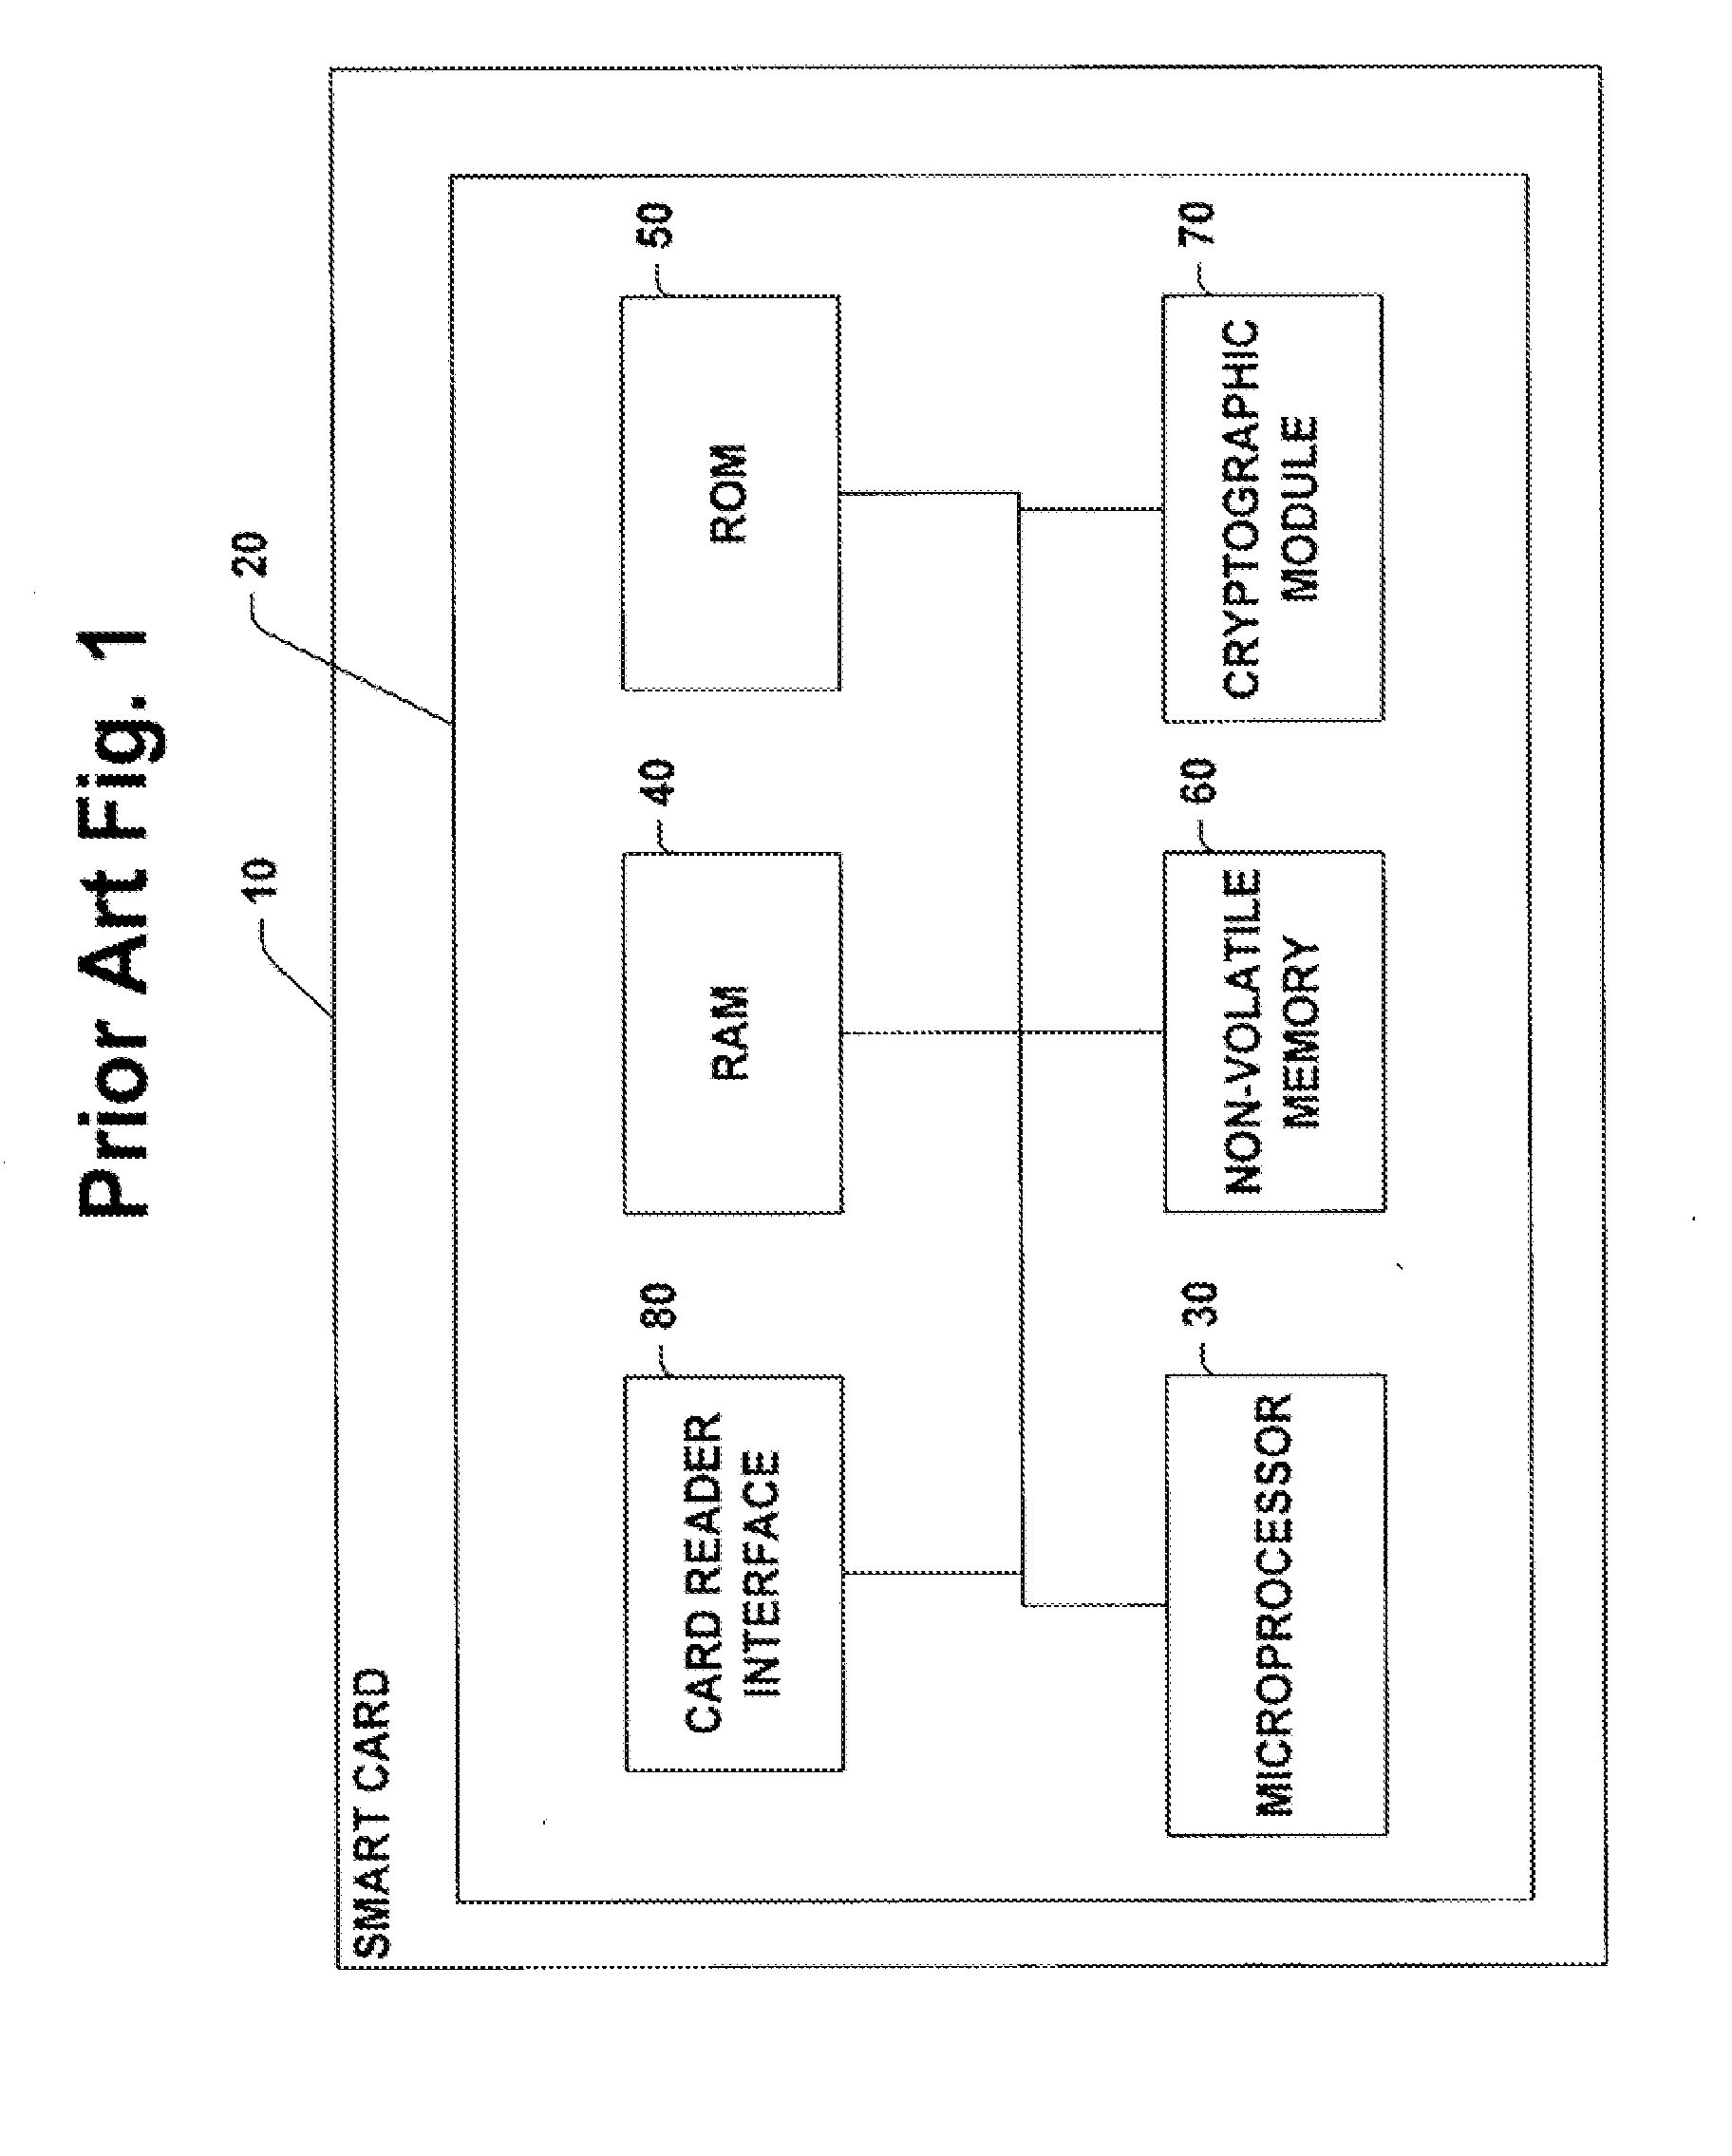 Late binding token in system and method for verifying intent in a card not present transaction